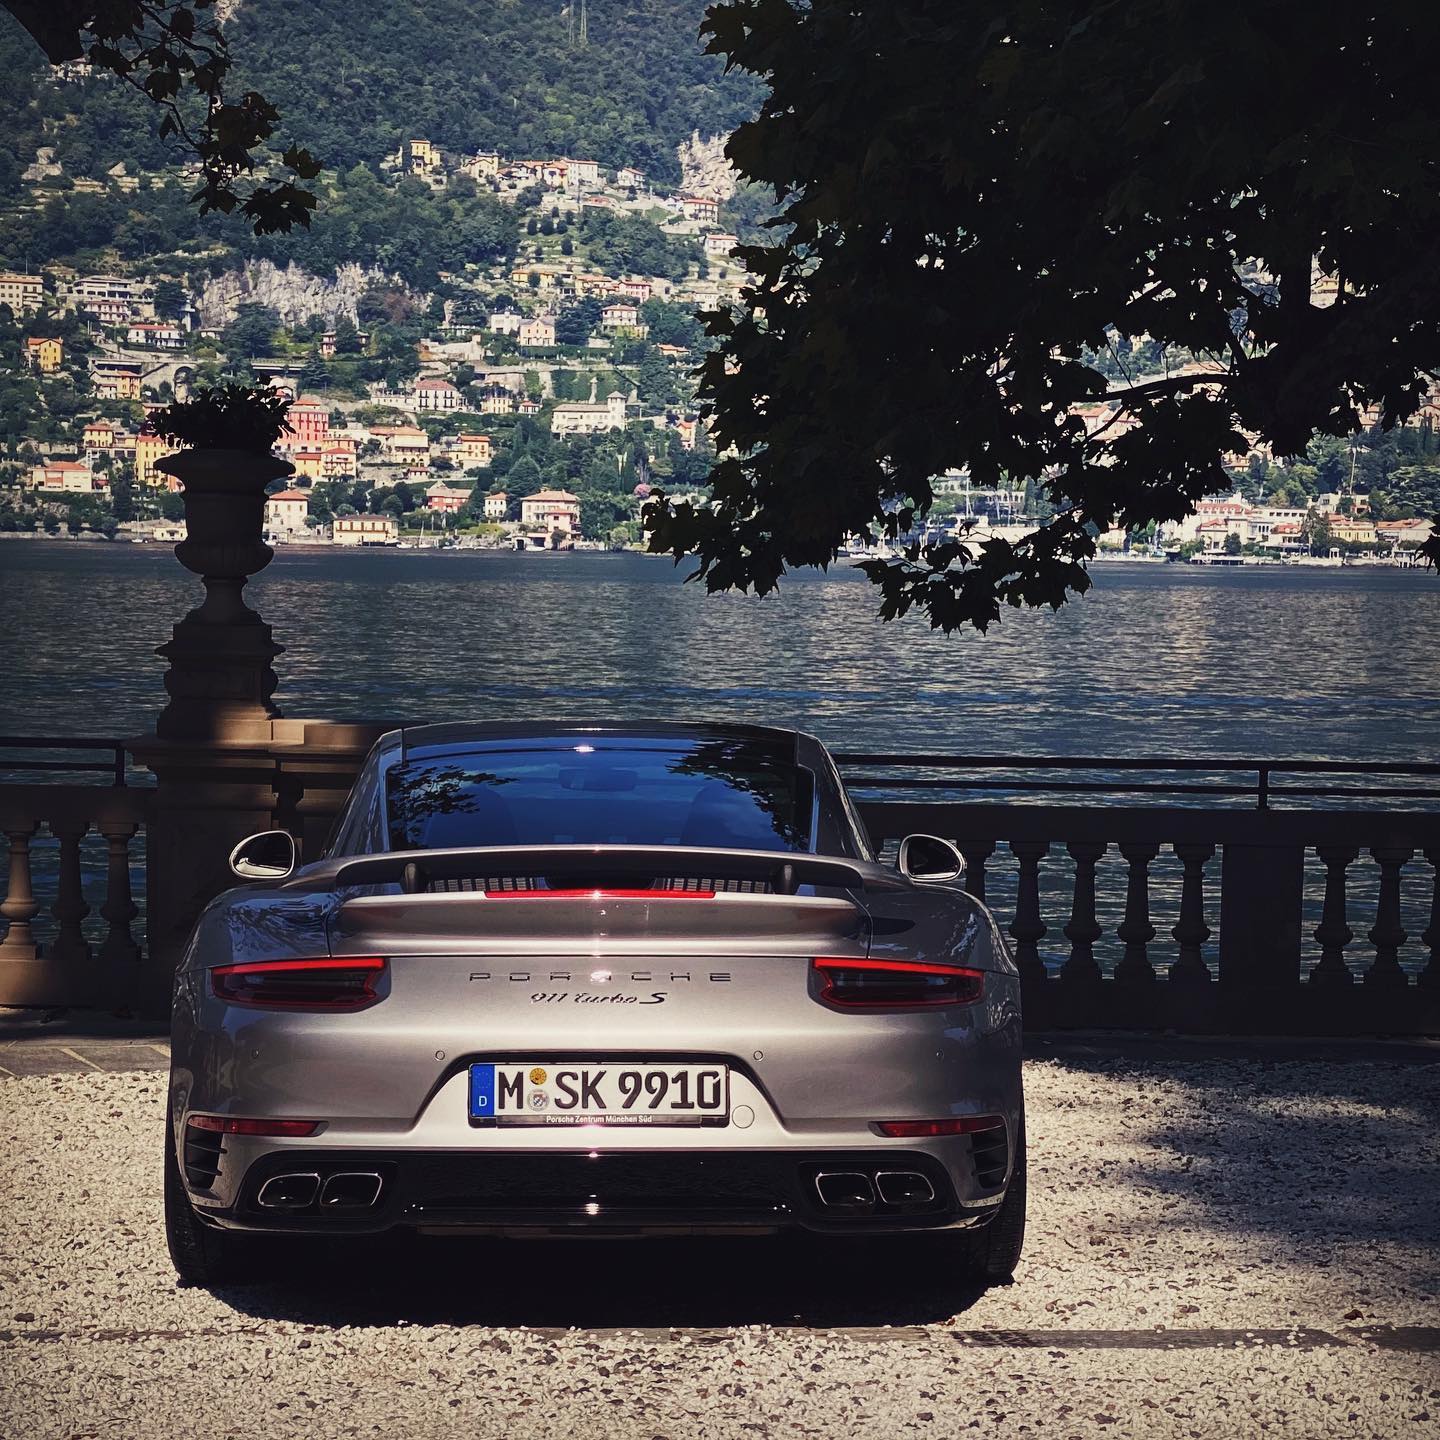 Life should not only be lived, it should be celebrated. Throwback to a great Sunday Morning @mo_lagodicomo best feeling in the world if you get up in the morning to explore some curves . #oneworldoneturbo #porsche